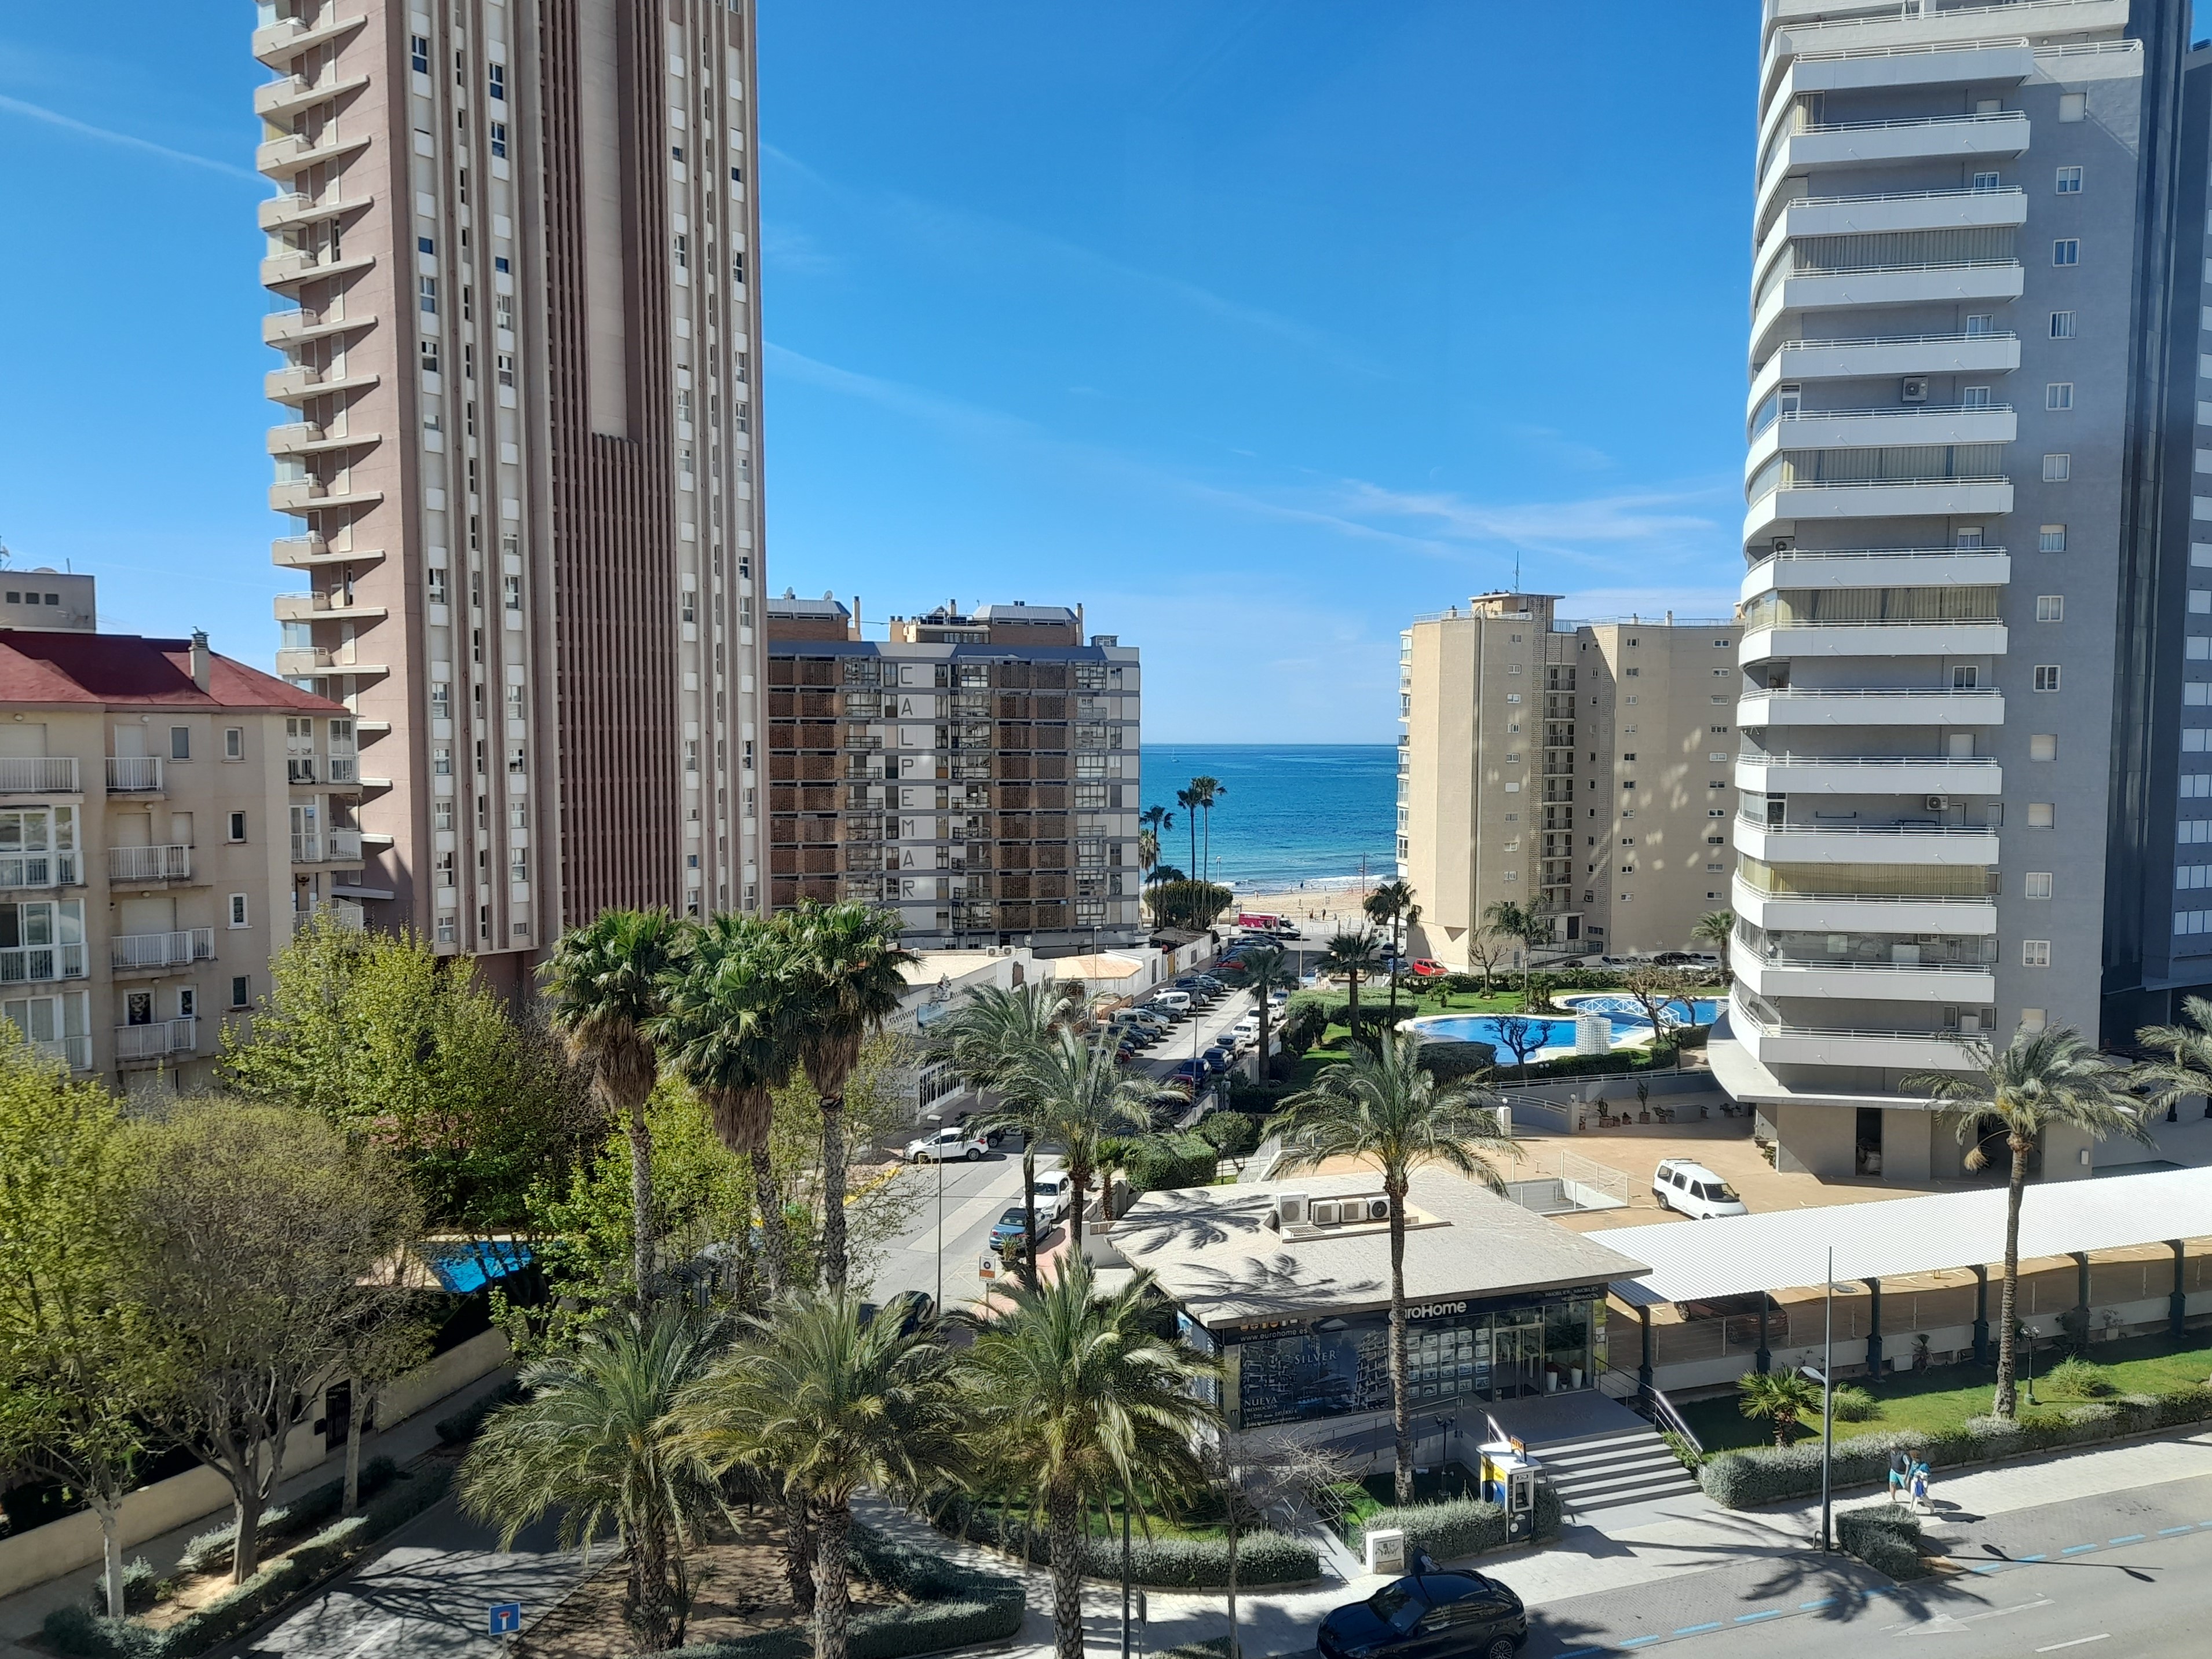 Two-bedroom apartment for sale in edificio Peñasol. Located near the Arenal beach and 5 minute walk from the center of Calpe.